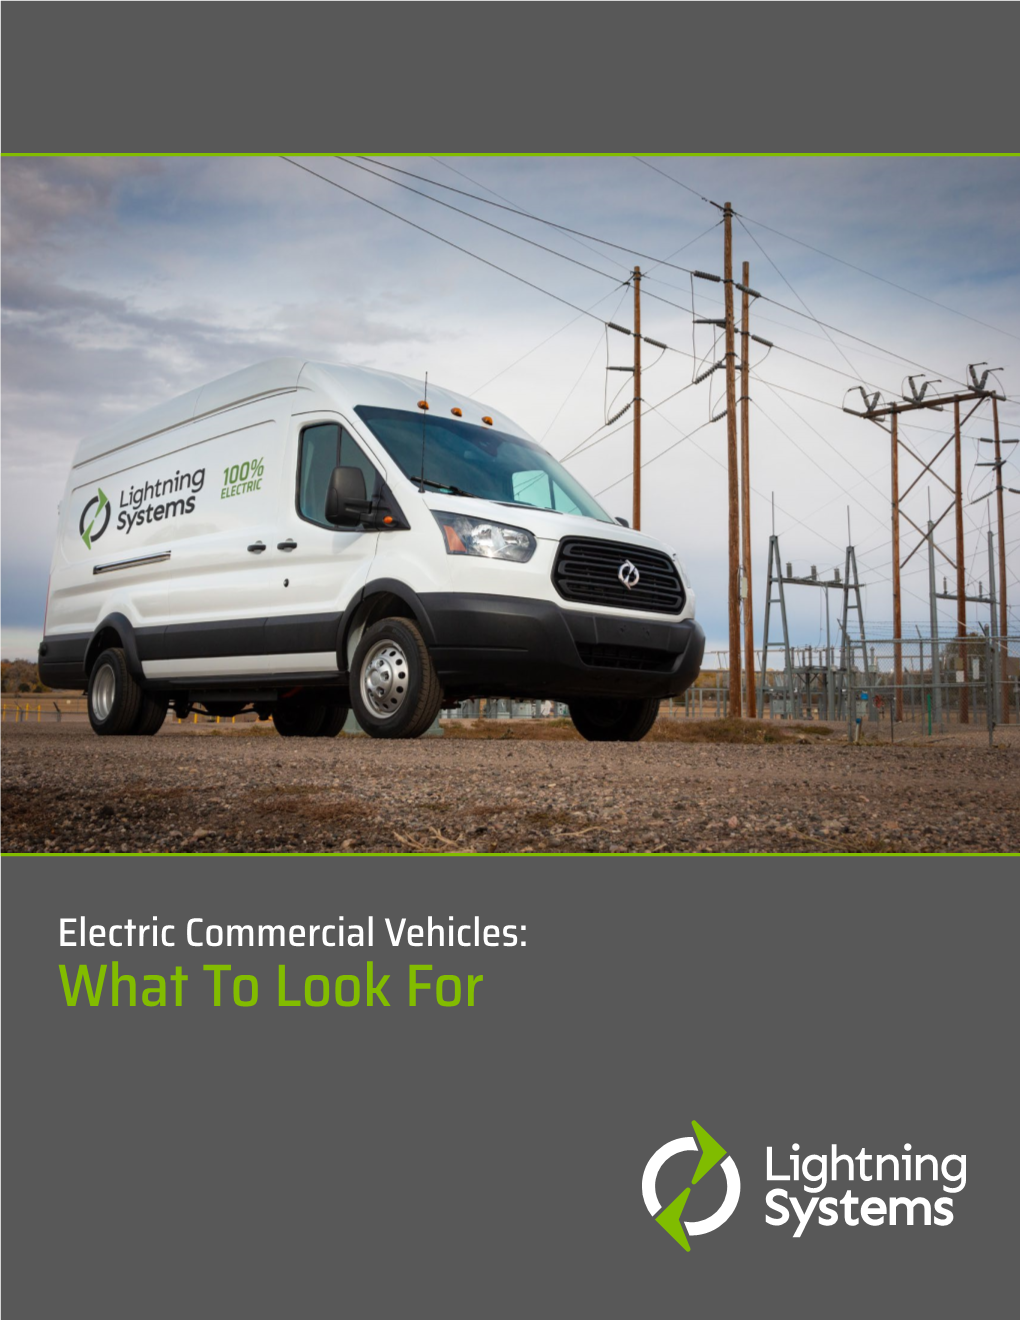 What to Look for Electric Commercial Vehicles: What to Look For